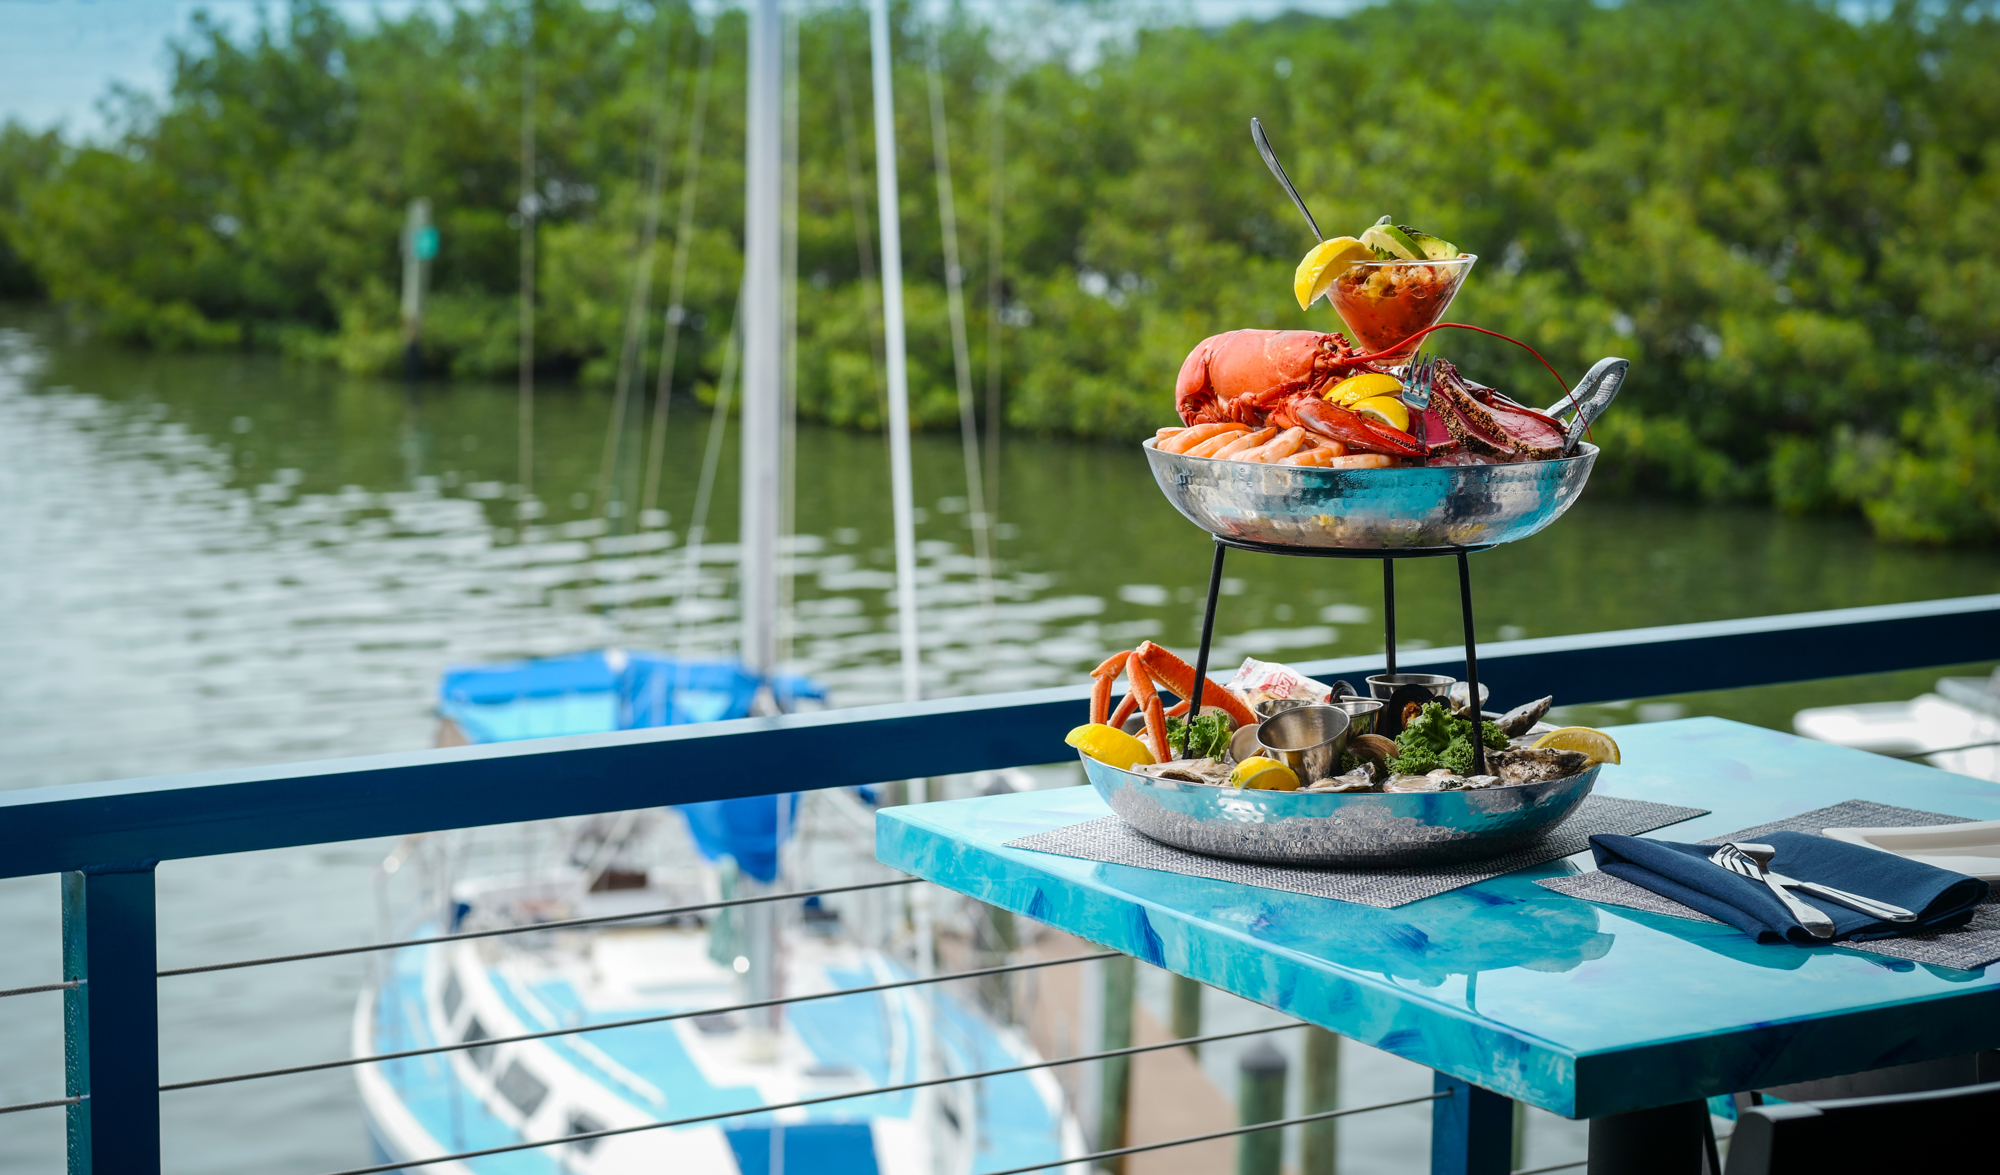 The Big Chill Seafood Tower at Deep Lagoon is sure to turn heads. (Courtesy photo)